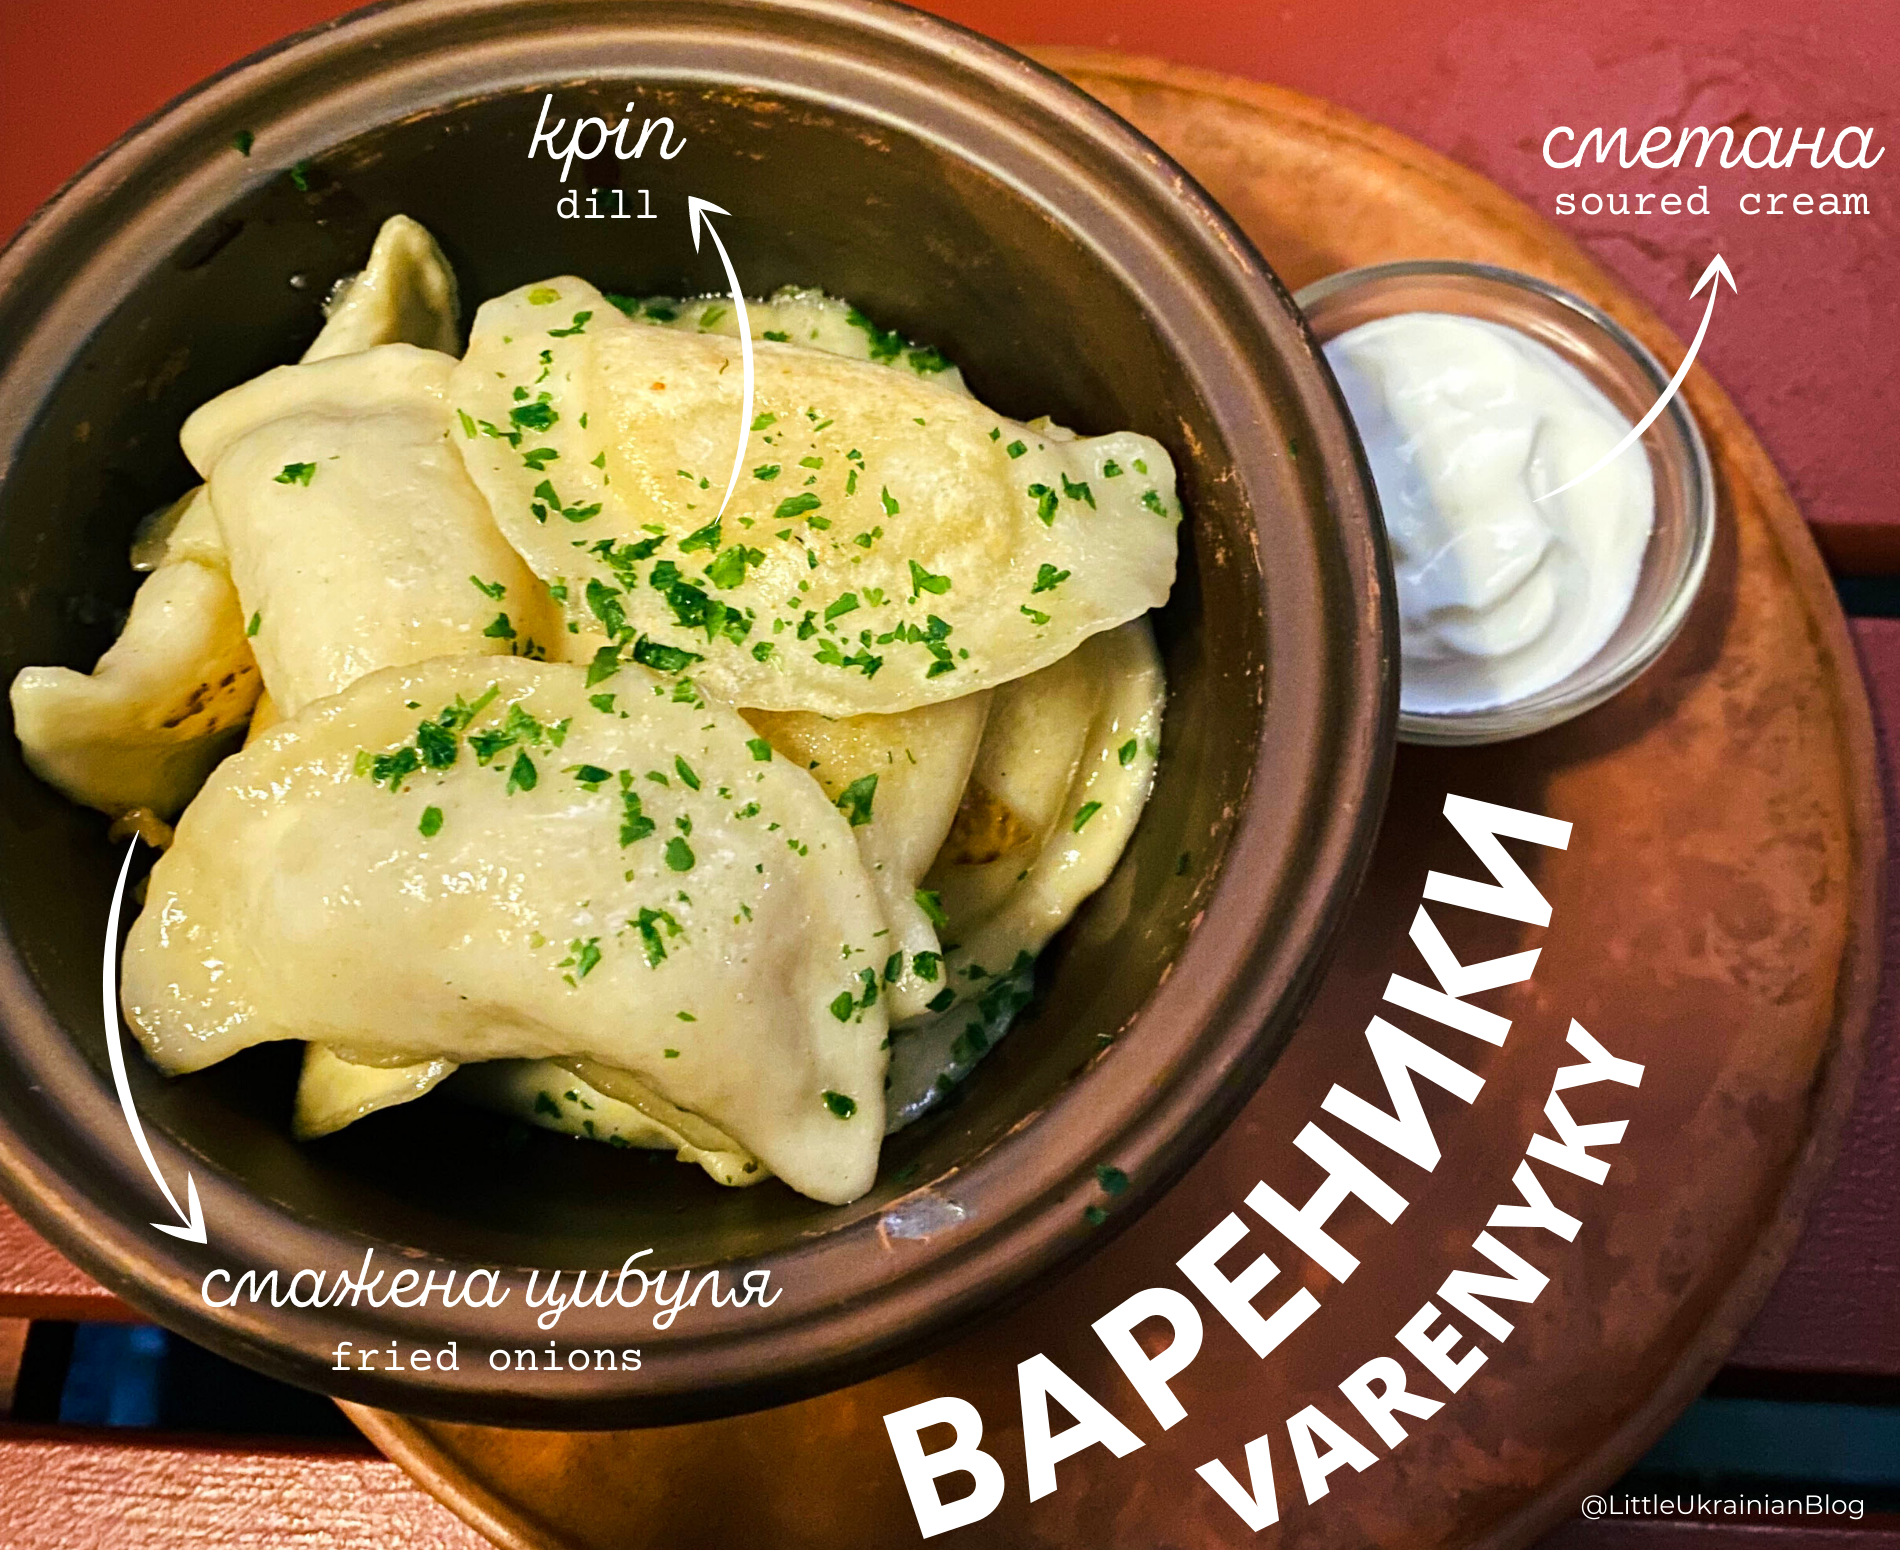 A picture of the Ukrainian dish 'Varenyky' at the restaurant Odessa Mama, in Berlin.